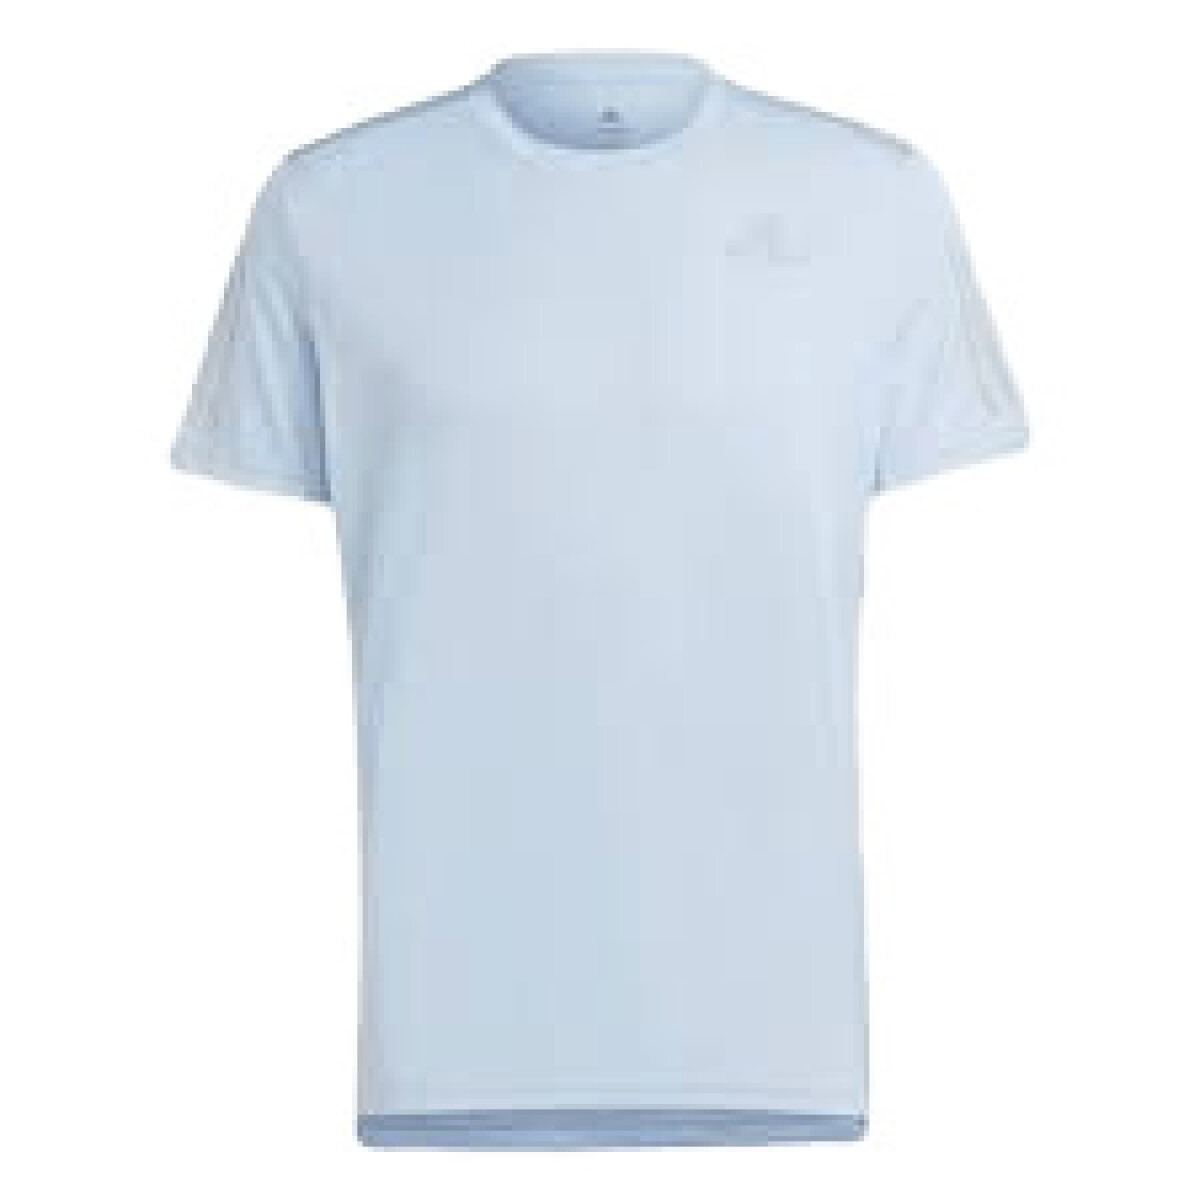 Remera Adidas Training Hombre Own The Run Tee - S/C 